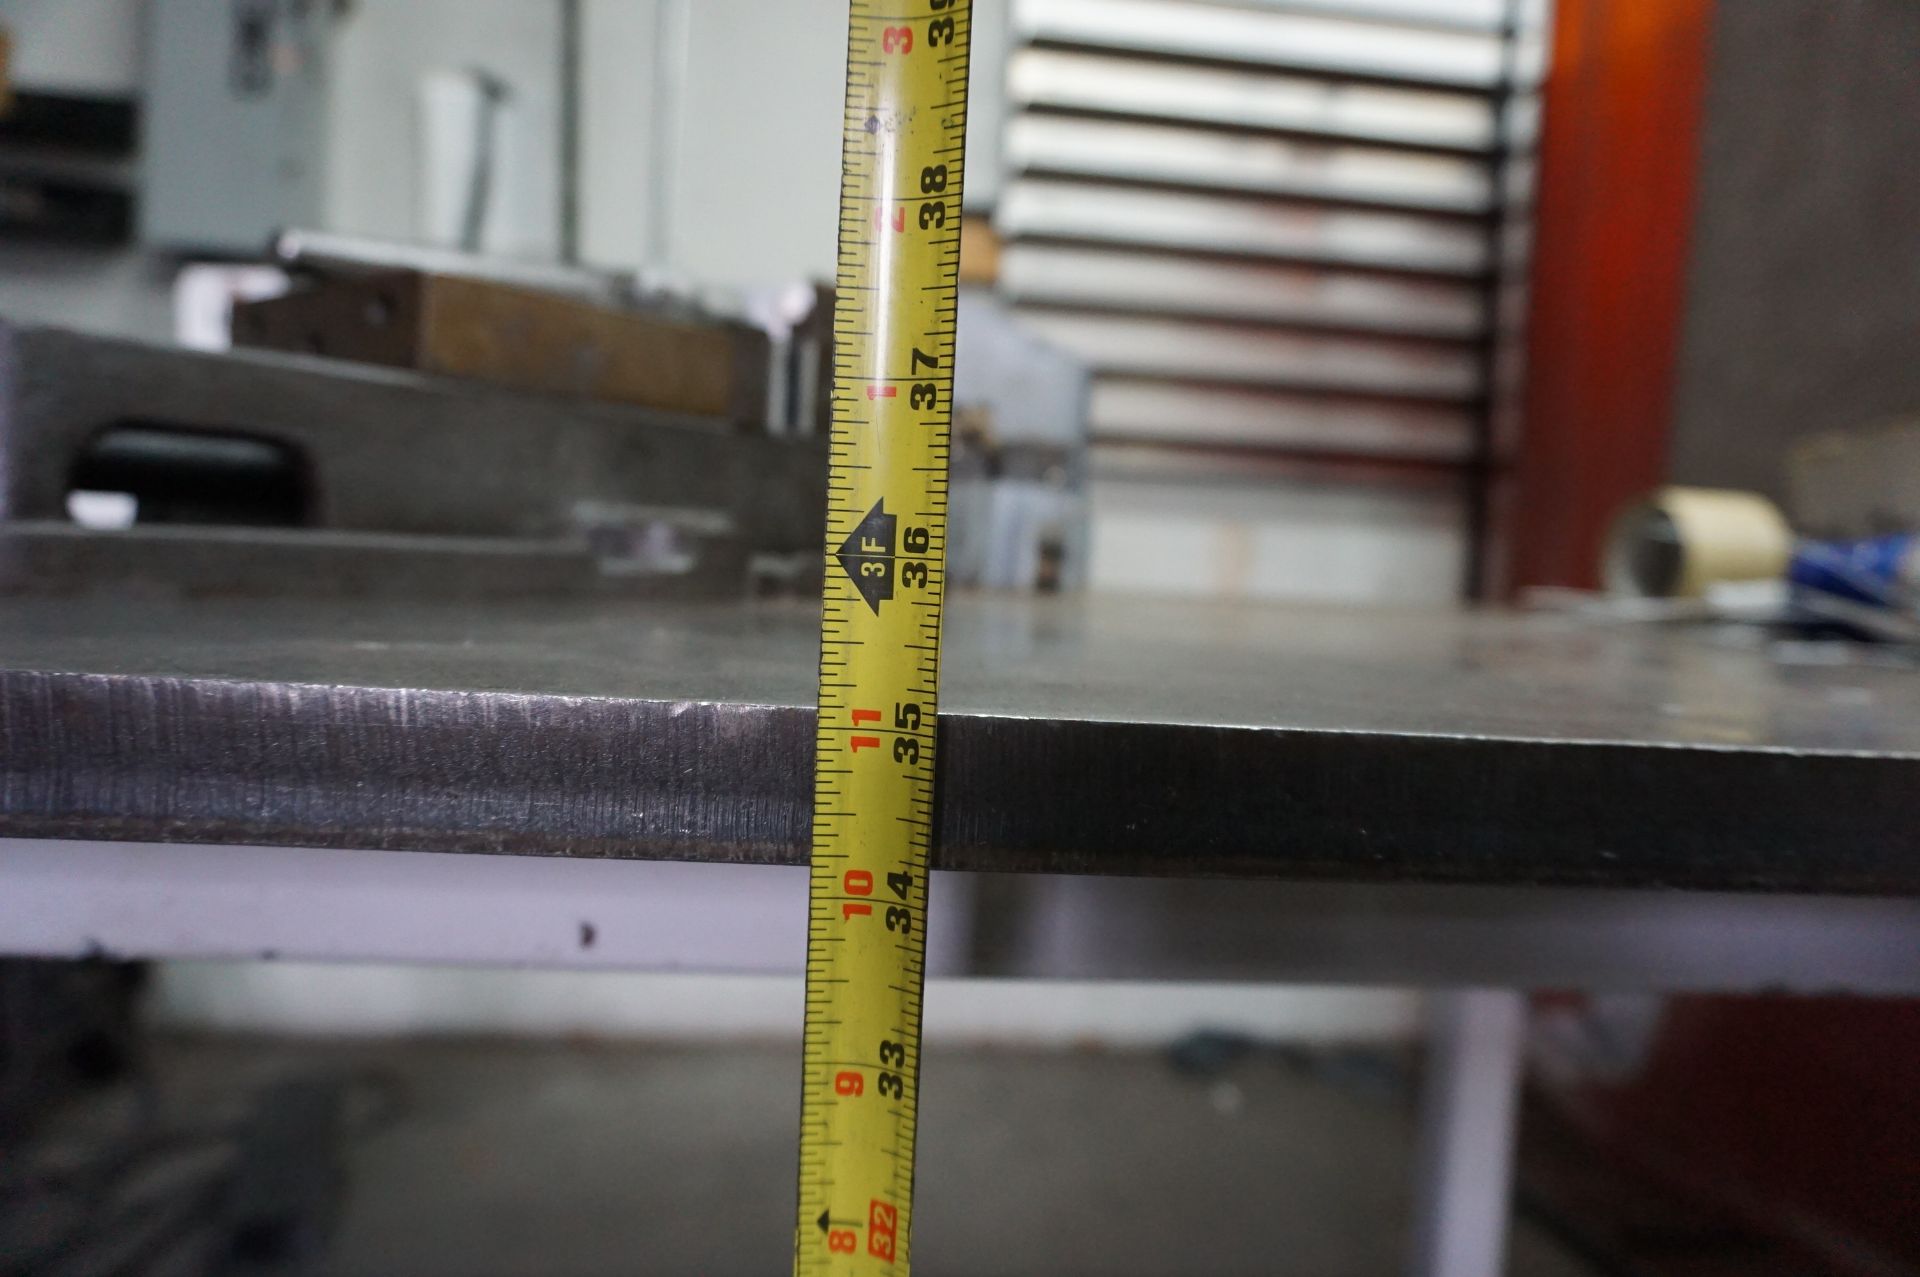 TABLE USED FOR TIG WELDING. 42" X 72" WORKING AREA, 1" THICK HEAVY STEEL TOP, 35" H, NO CONTENTS - Image 6 of 6